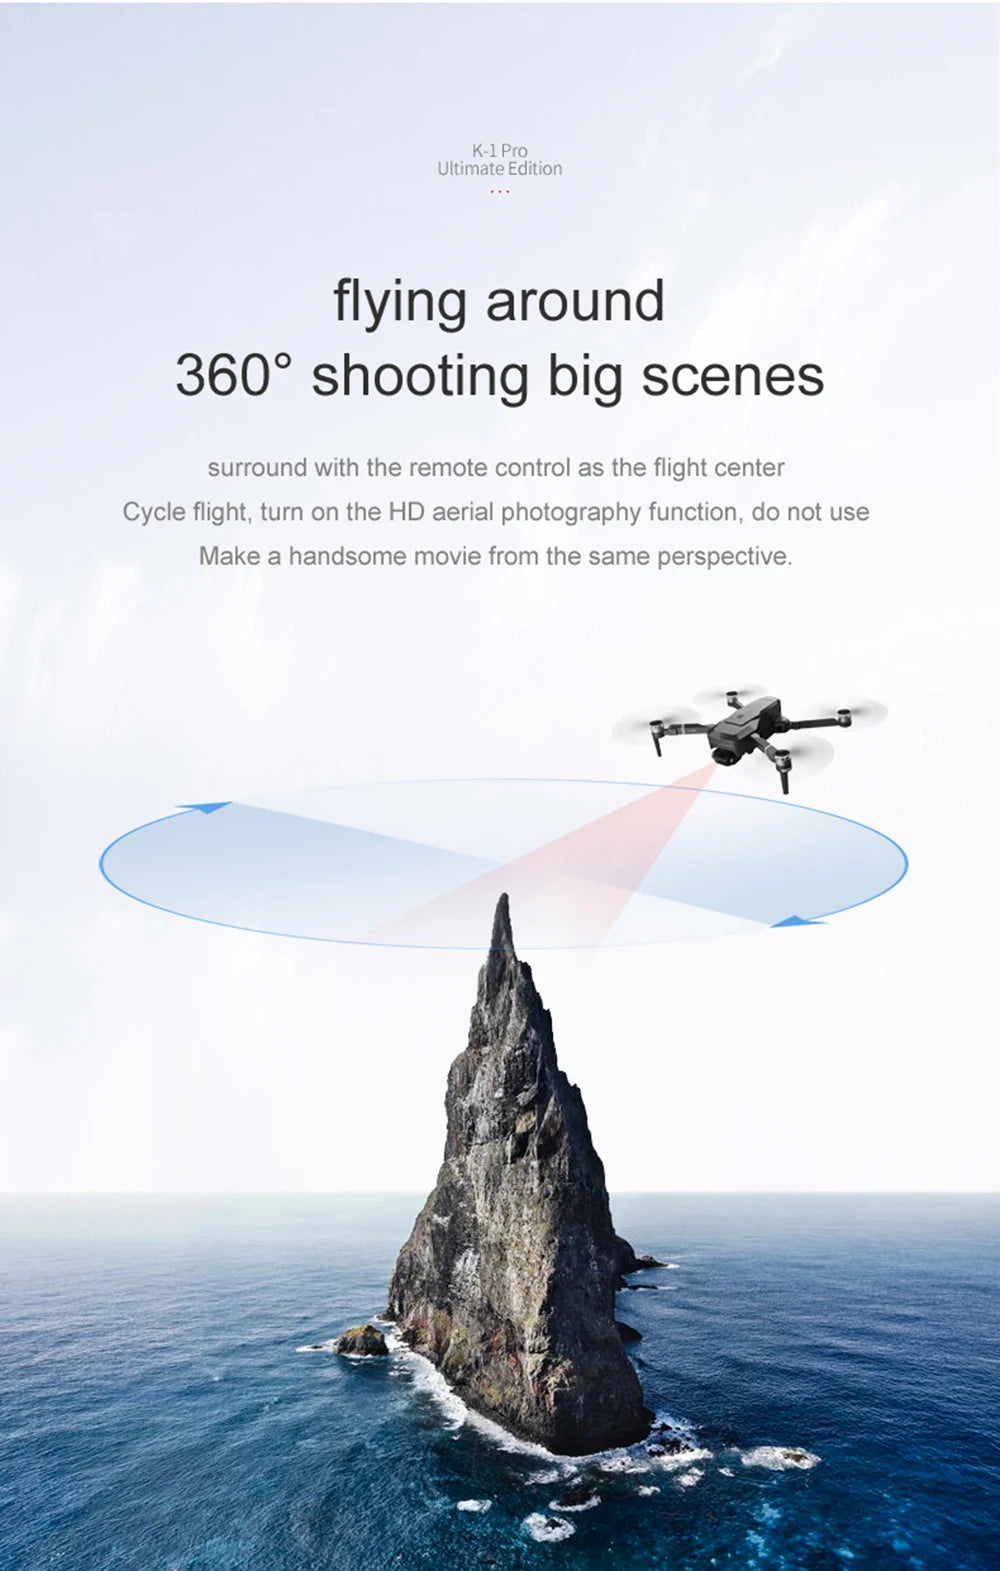 VISUO ZEN K1 PRO Drone, K-1Pro Ultimate Edition flying around 360' shooting big scenes surround with the remote control as the